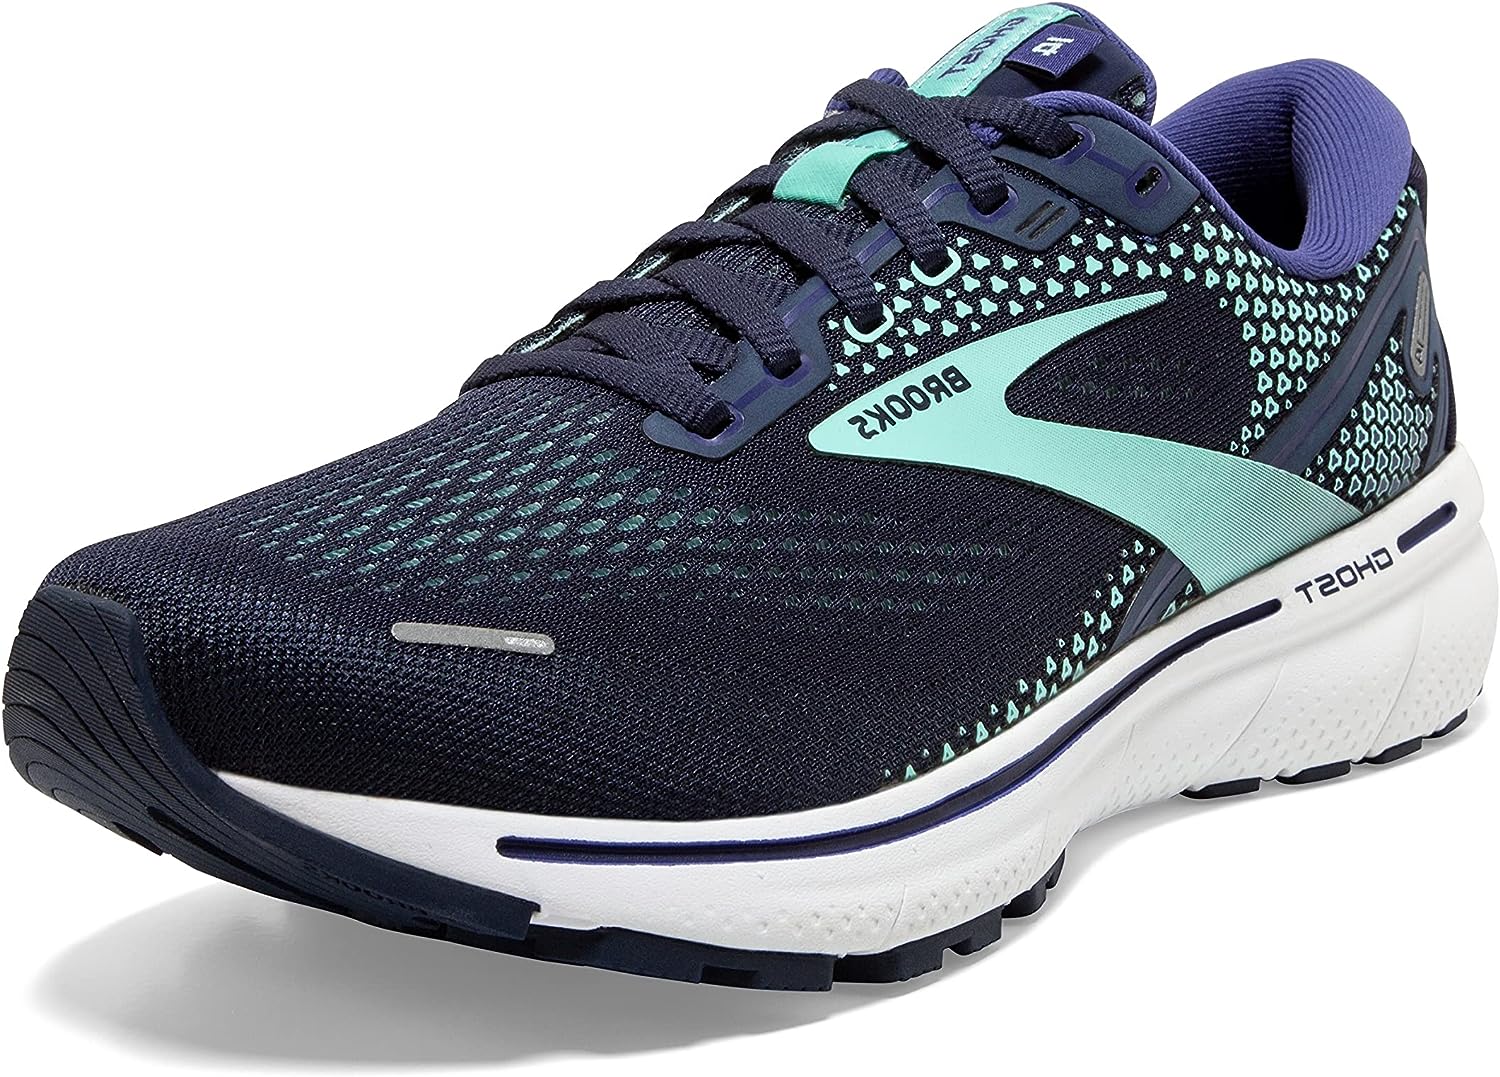 neutral running shoe for supination detailed review